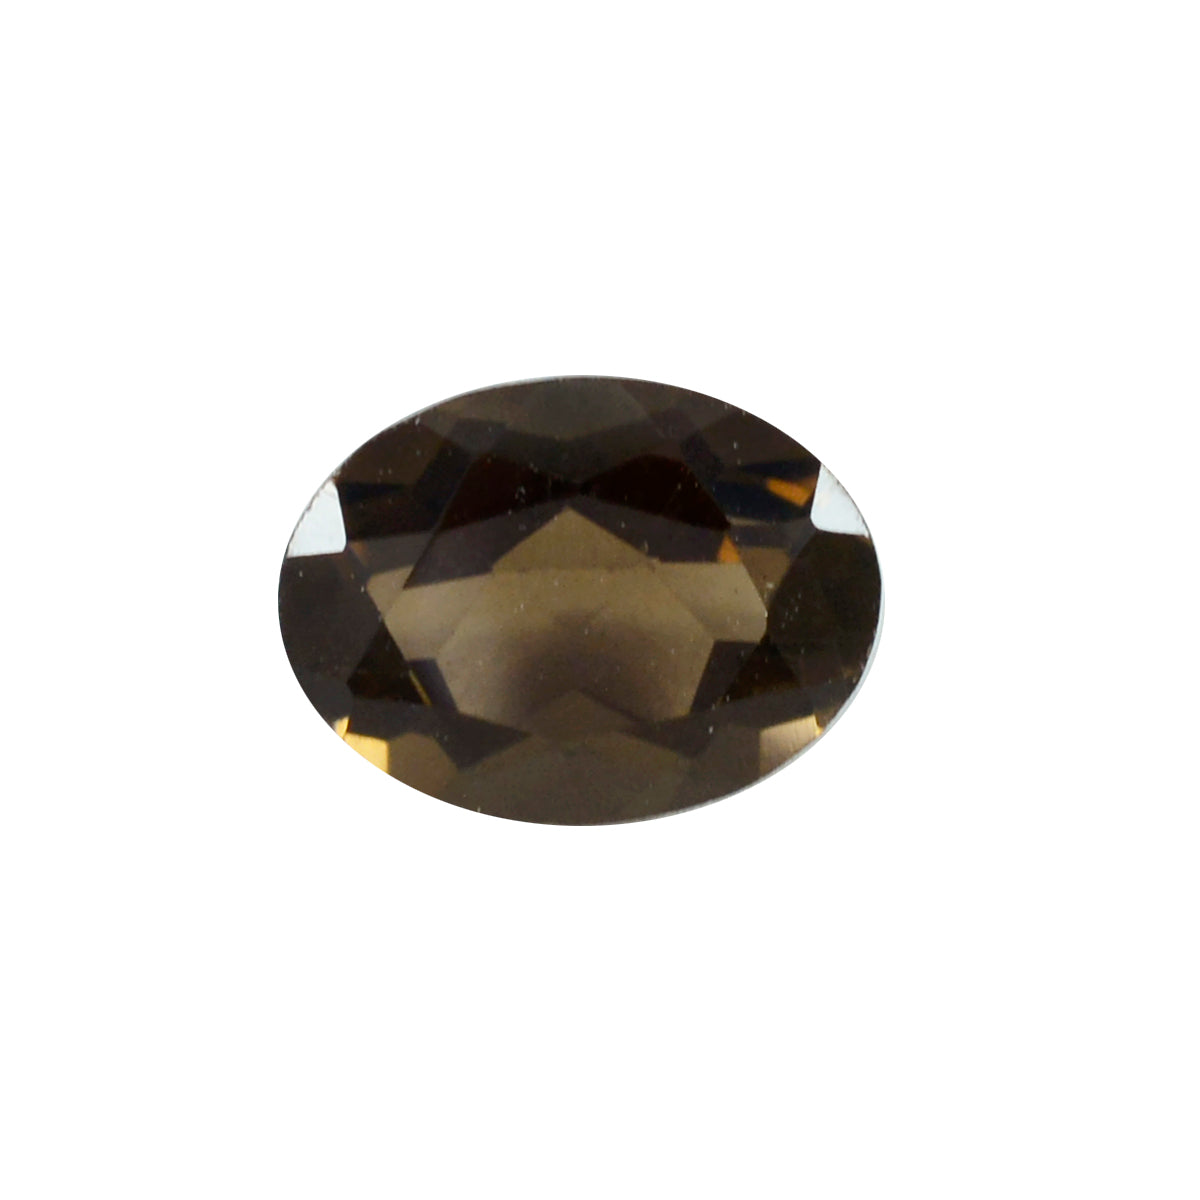 Riyogems 1PC Genuine Brown Smoky Quartz Faceted 9x11 mm Oval Shape great Quality Loose Stone